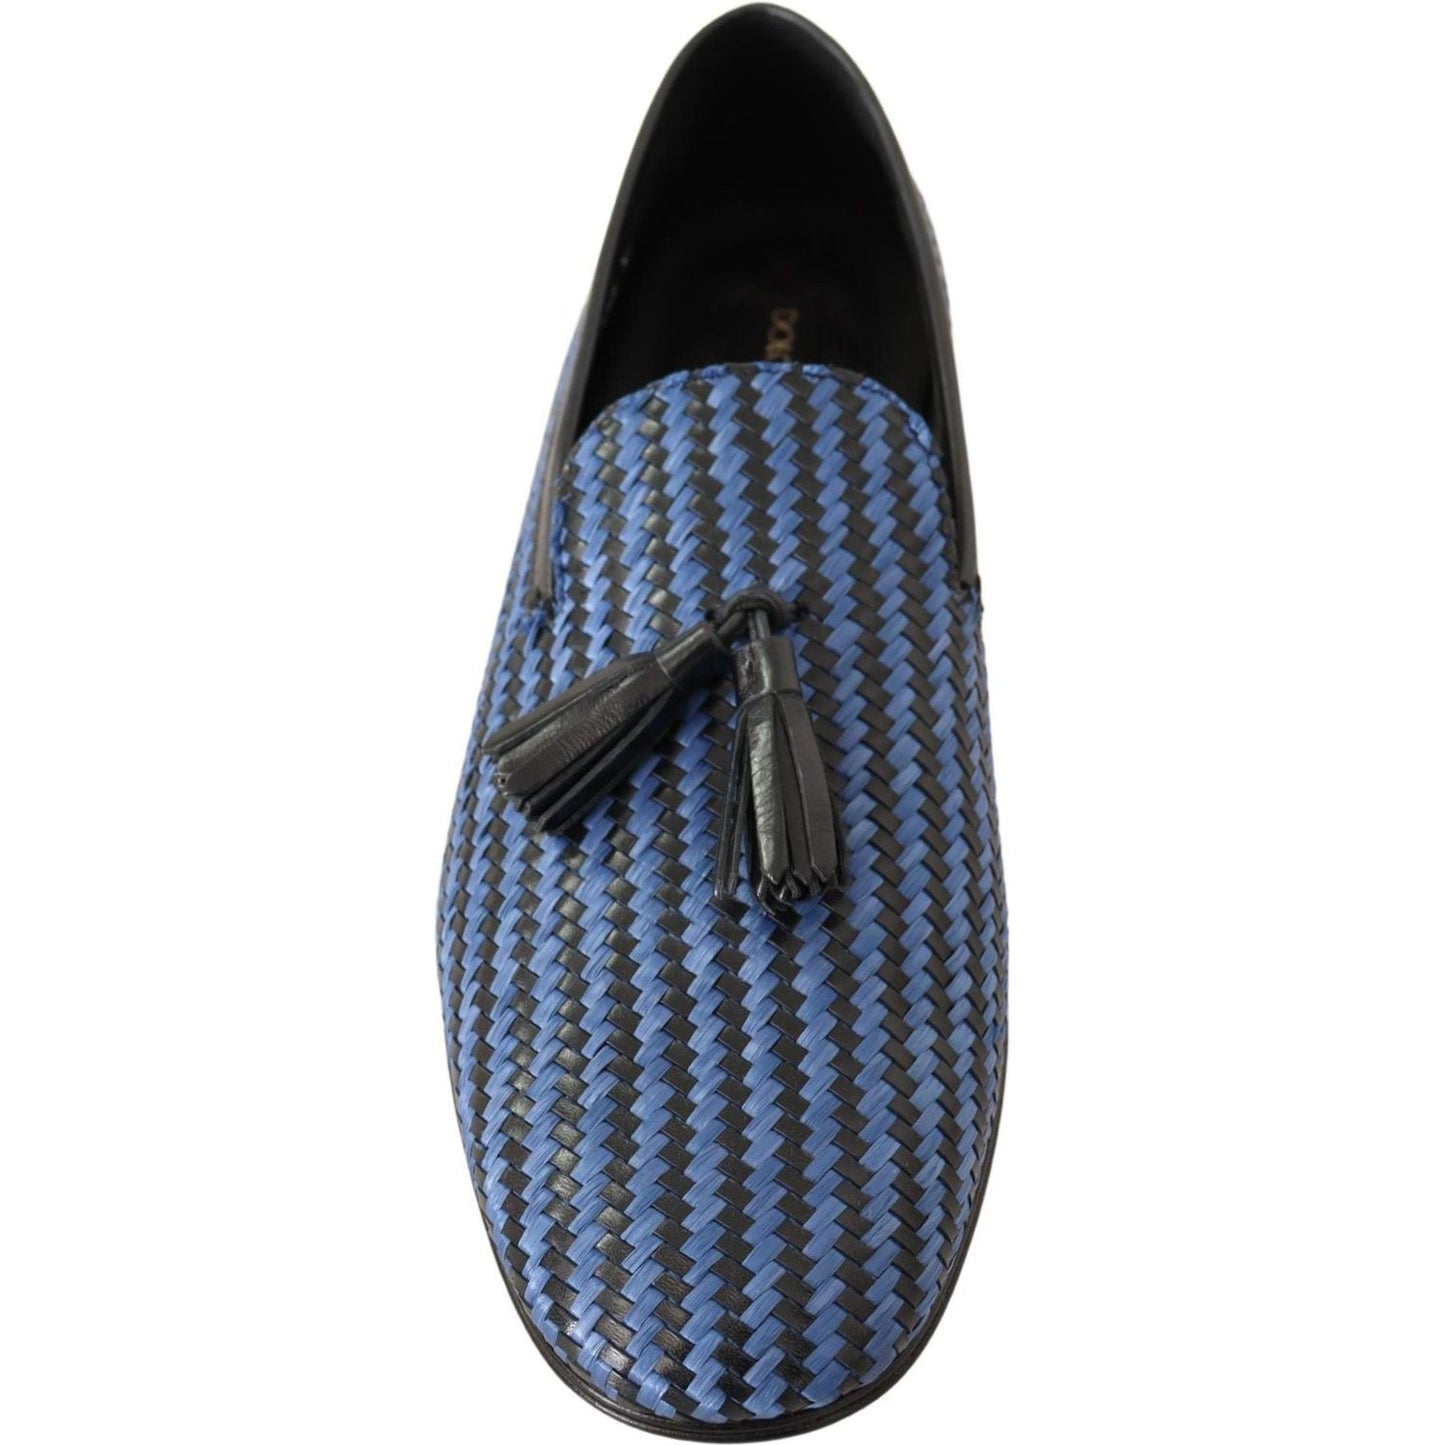 Dolce & Gabbana Elegant Woven Leather Loafers MAN LOAFERS blue-woven-leather-tassel-loafers-shoes